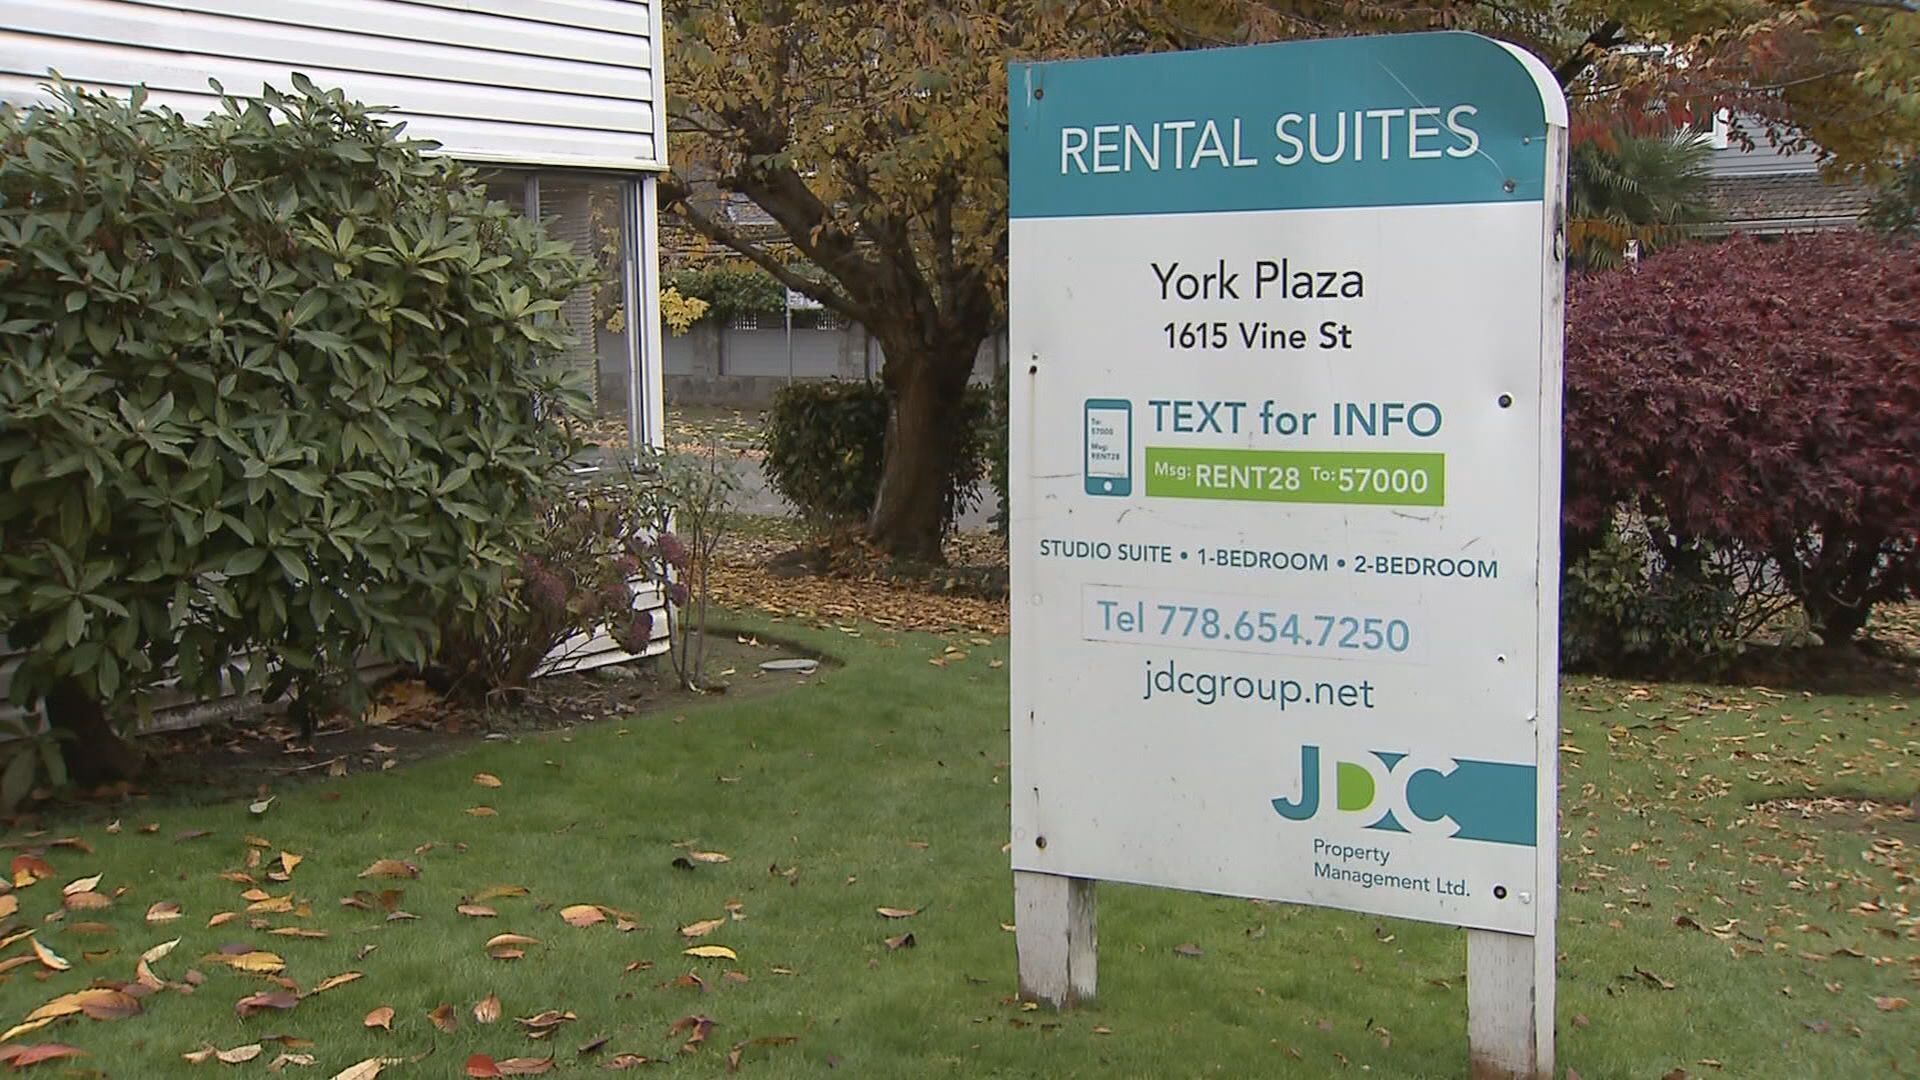 Young renters in Vancouver are the least happy British Columbians: survey